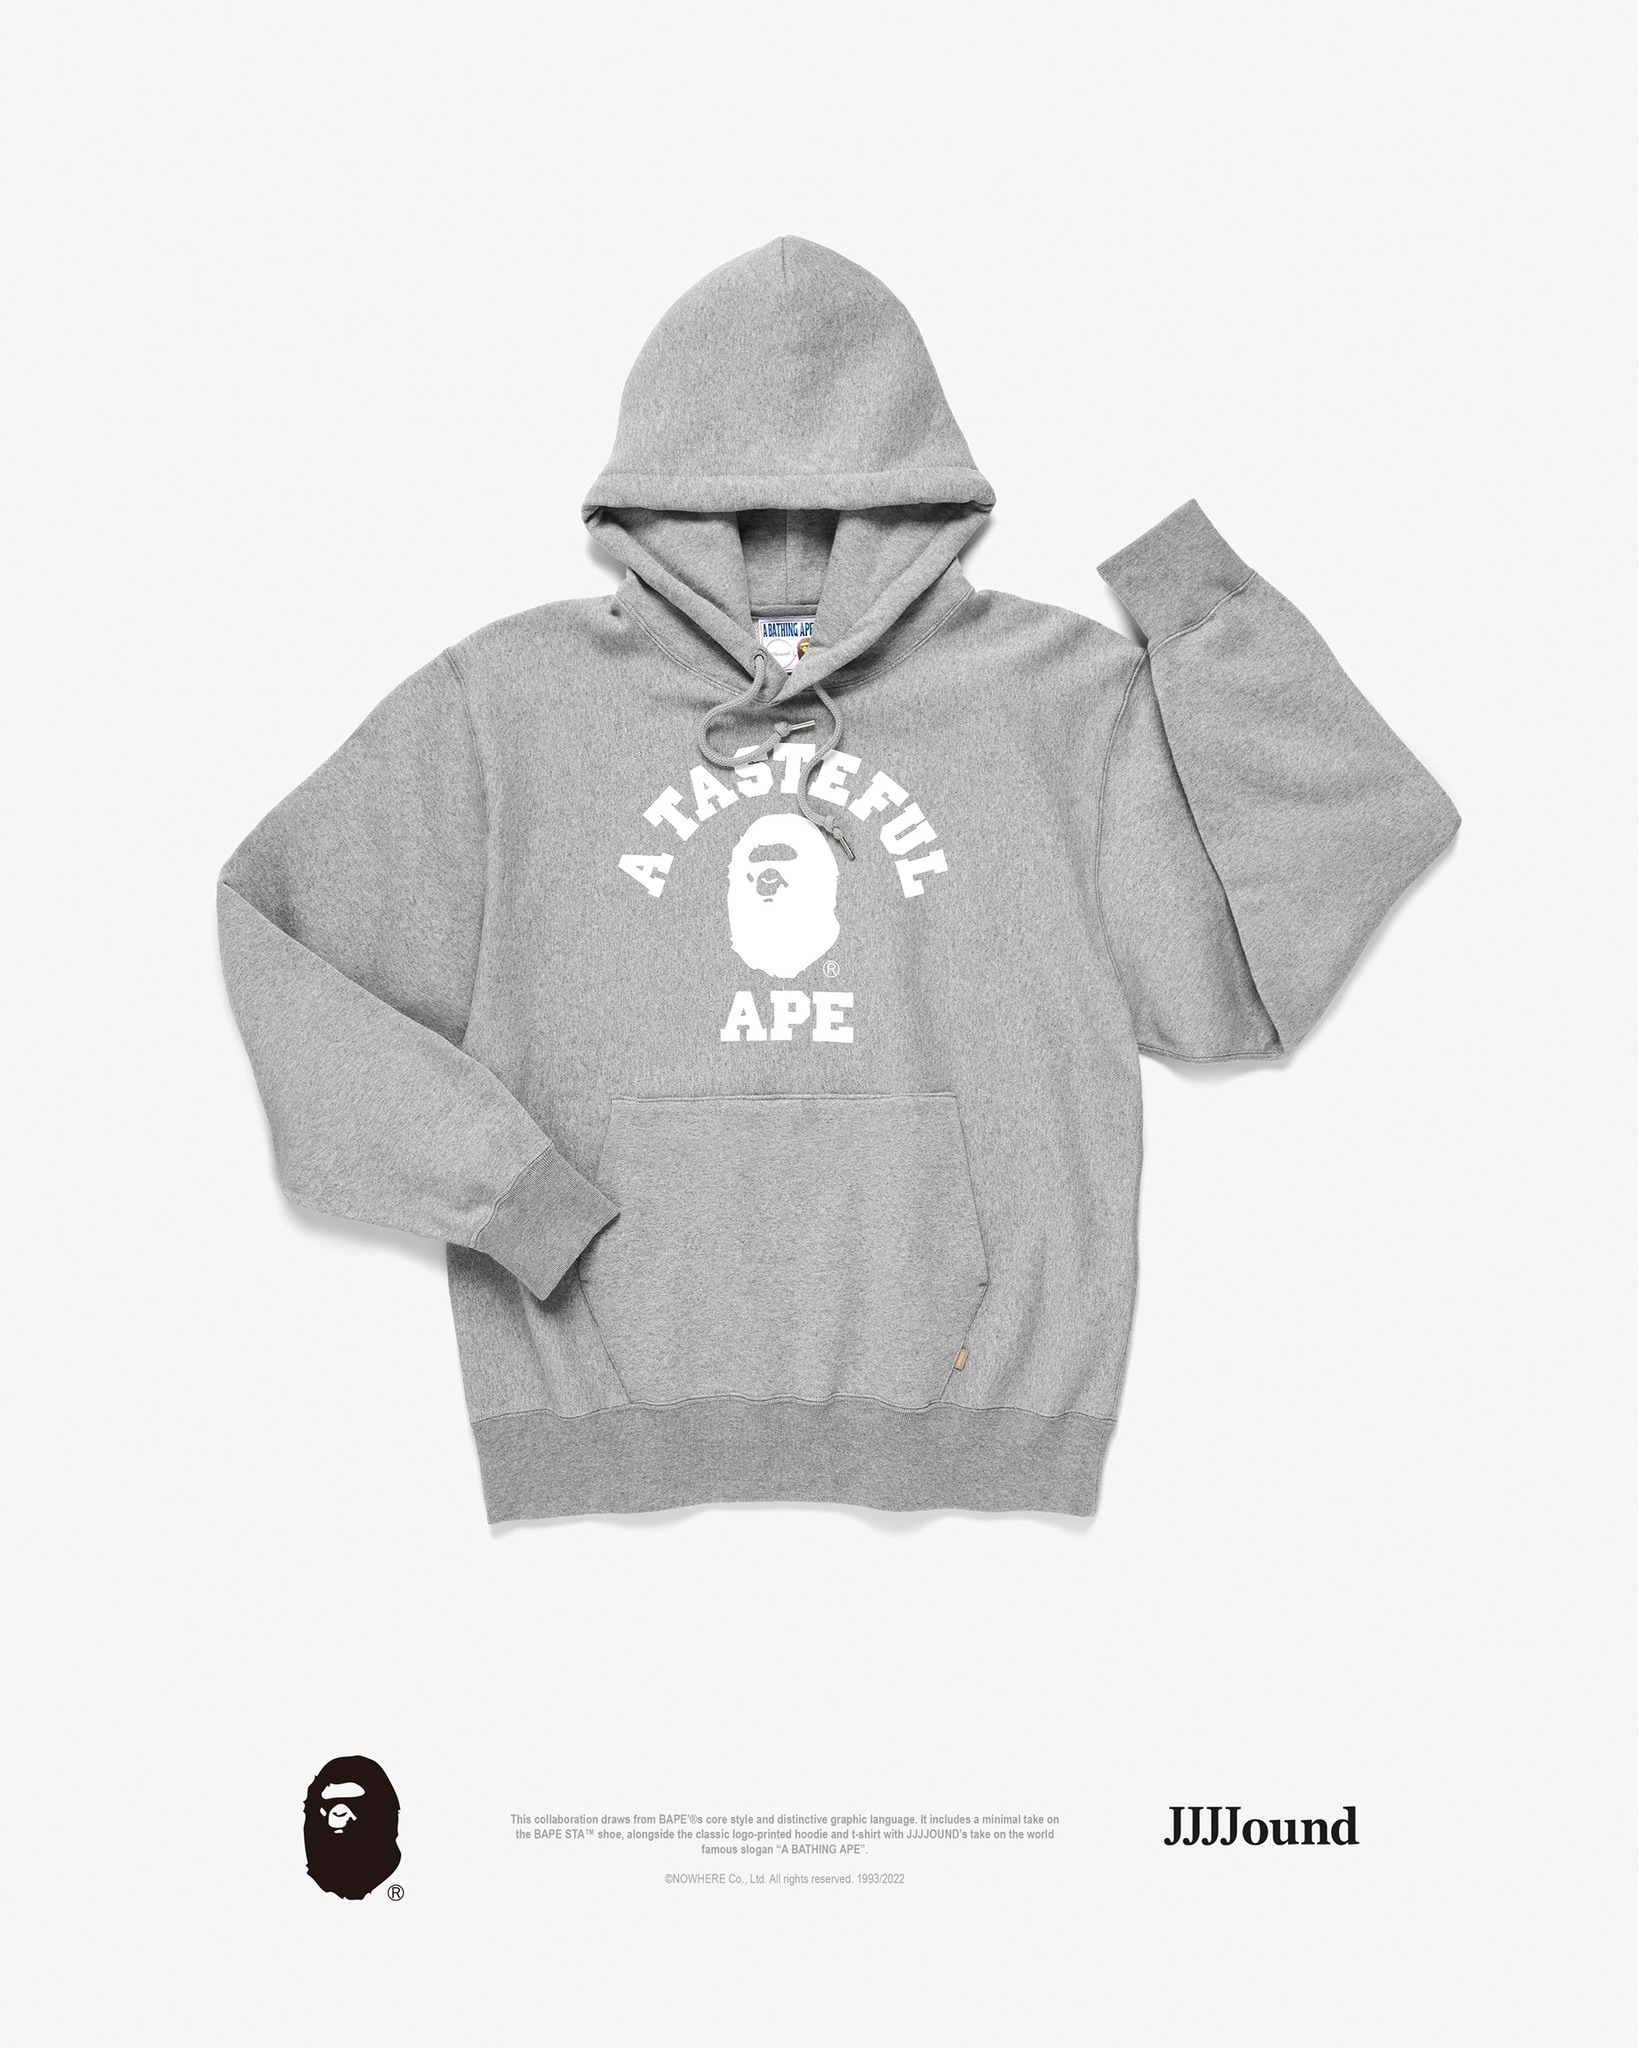 JJJJound x A BATHING APE Collection Release Date